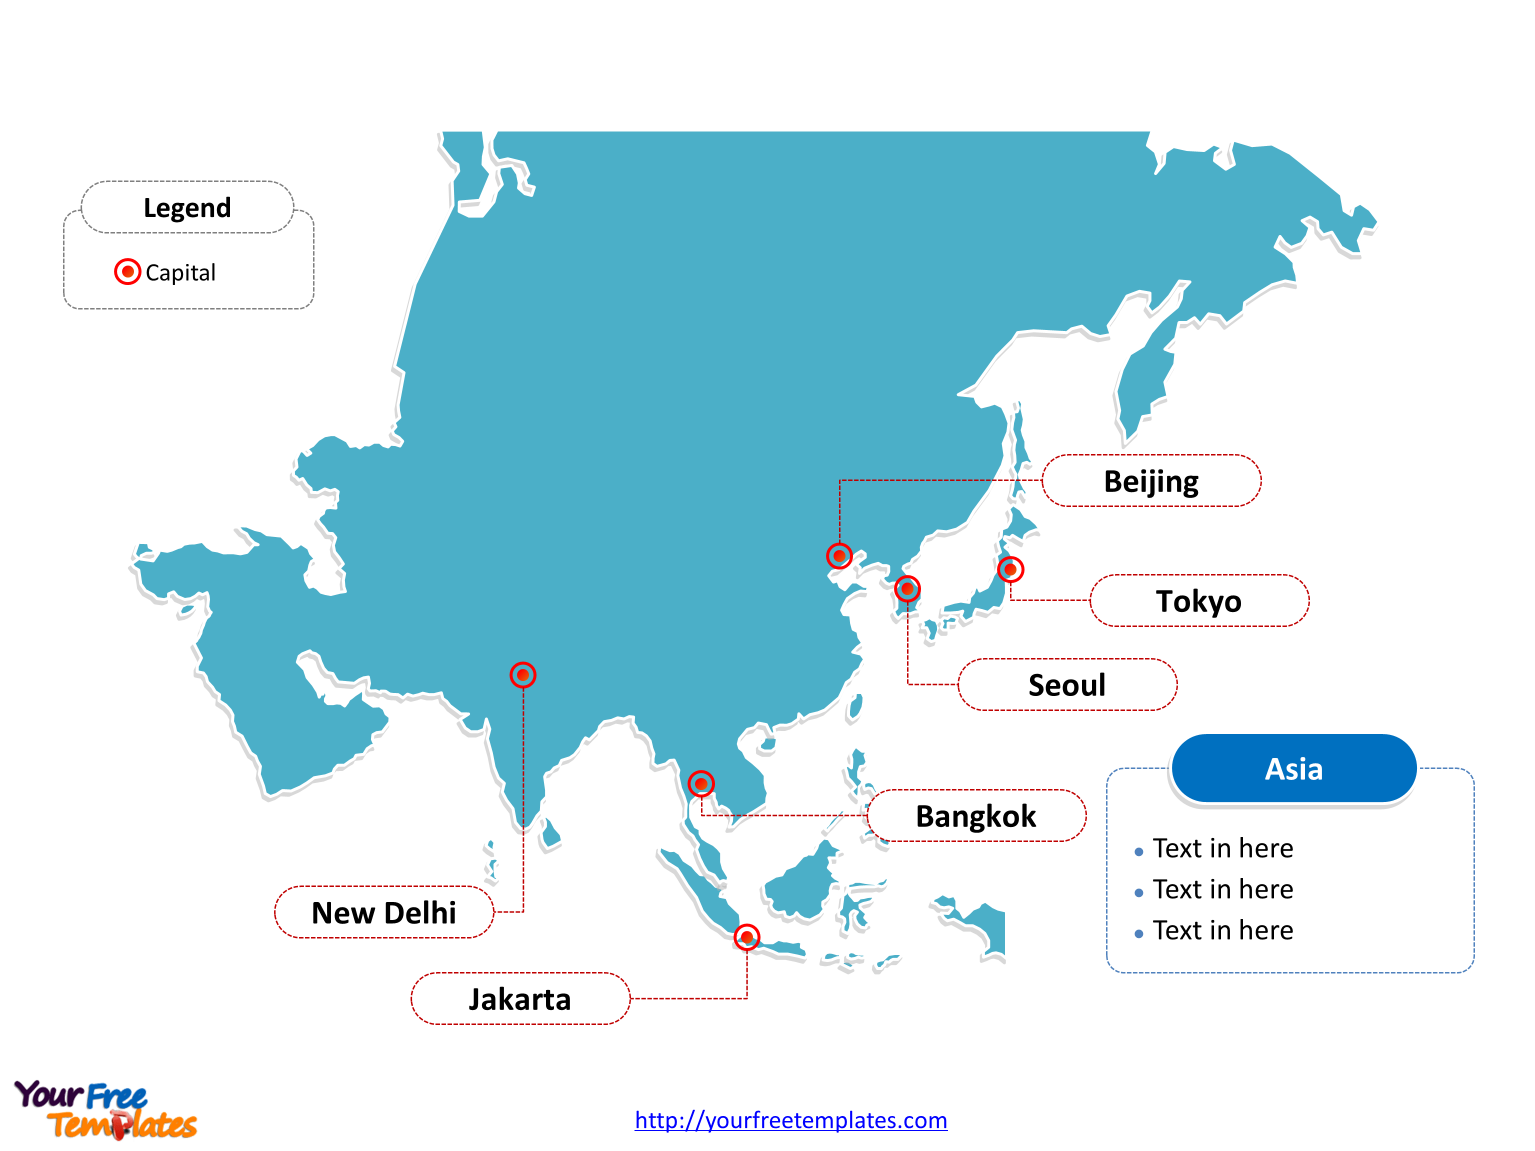 Map of Asia with outline and cities labeled on the Asia map free templates, or Asia continent map